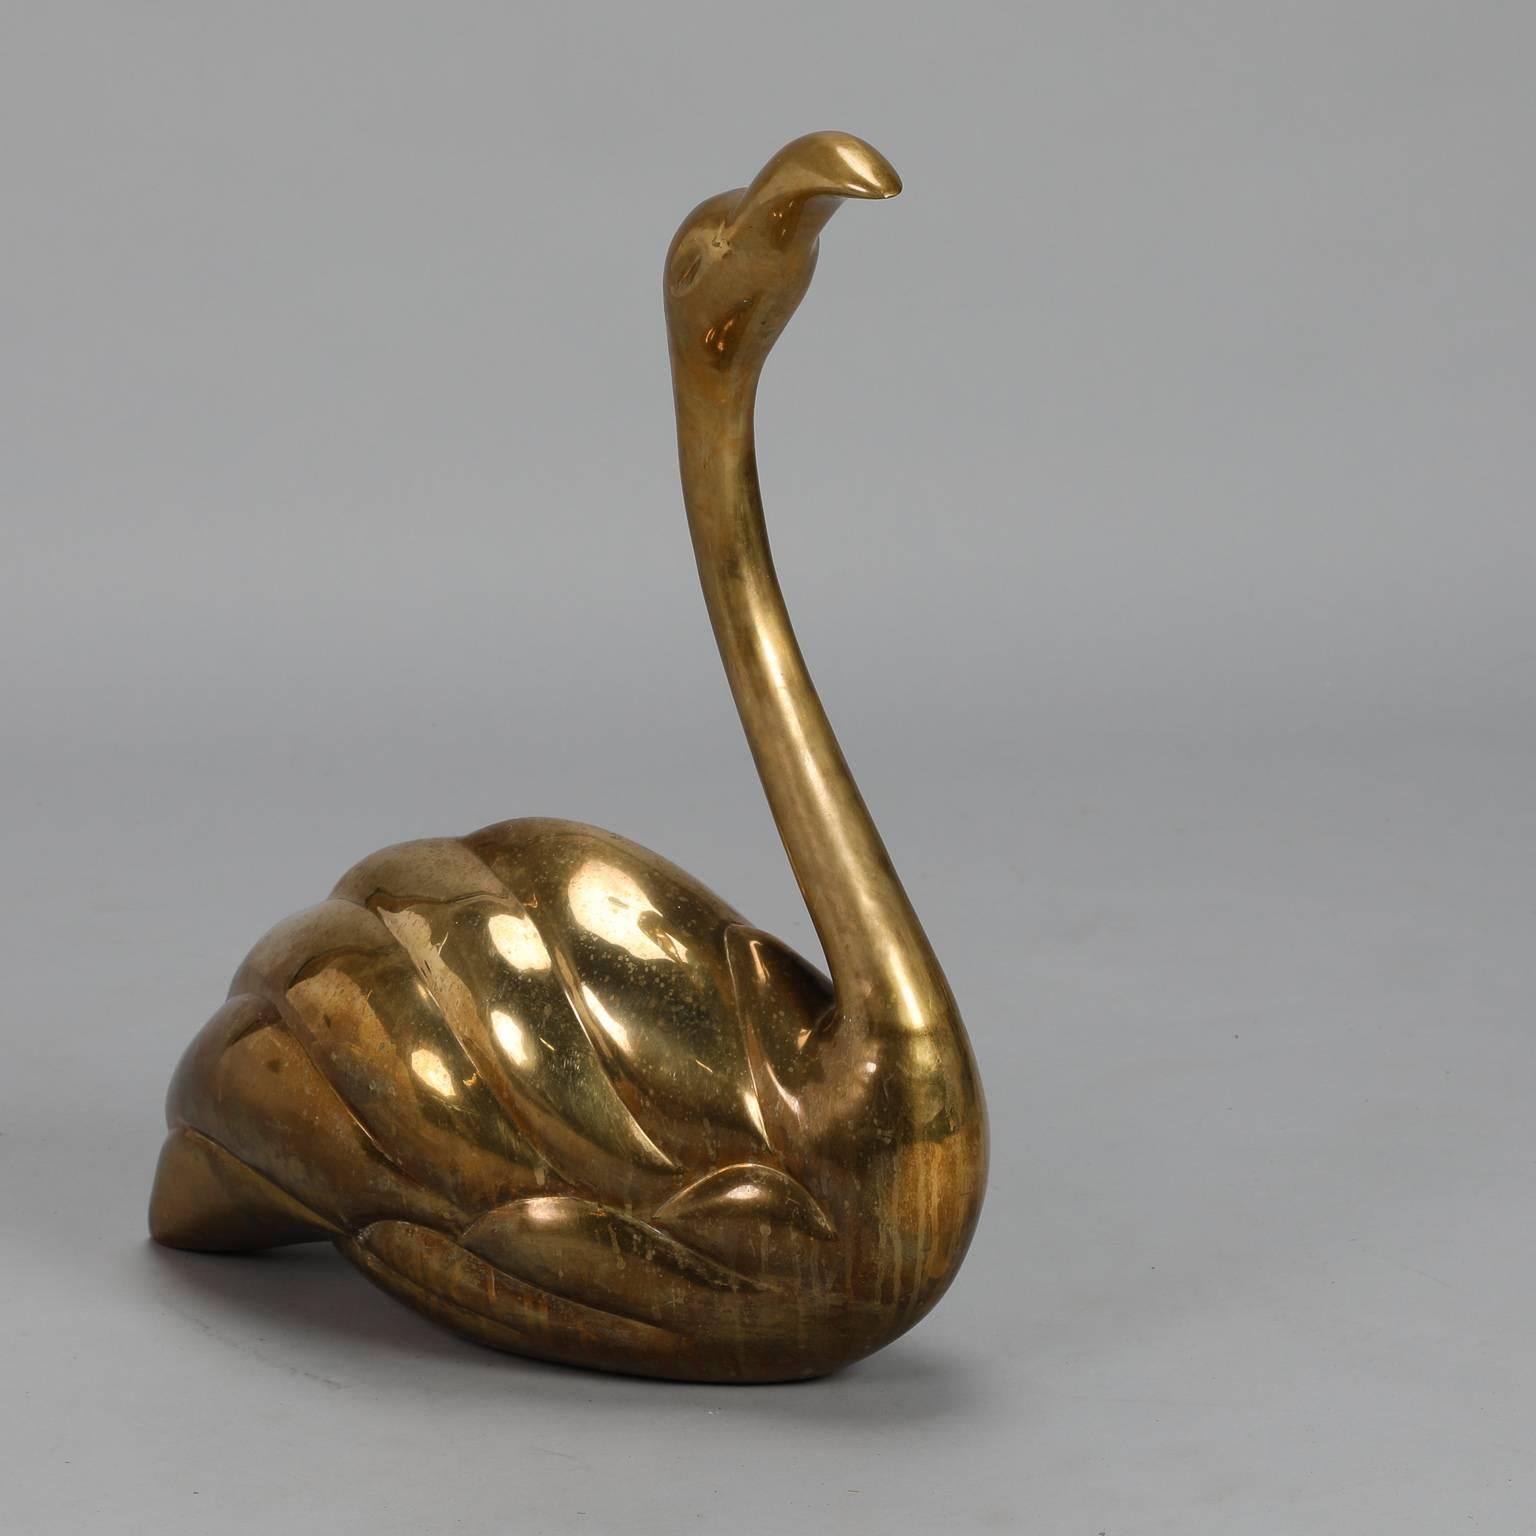 Spanish large solid brass seated or floating flamingo, circa 1970s. Sits nicely on a table or shelf and is two feet tall as shown. Unknown maker.
  